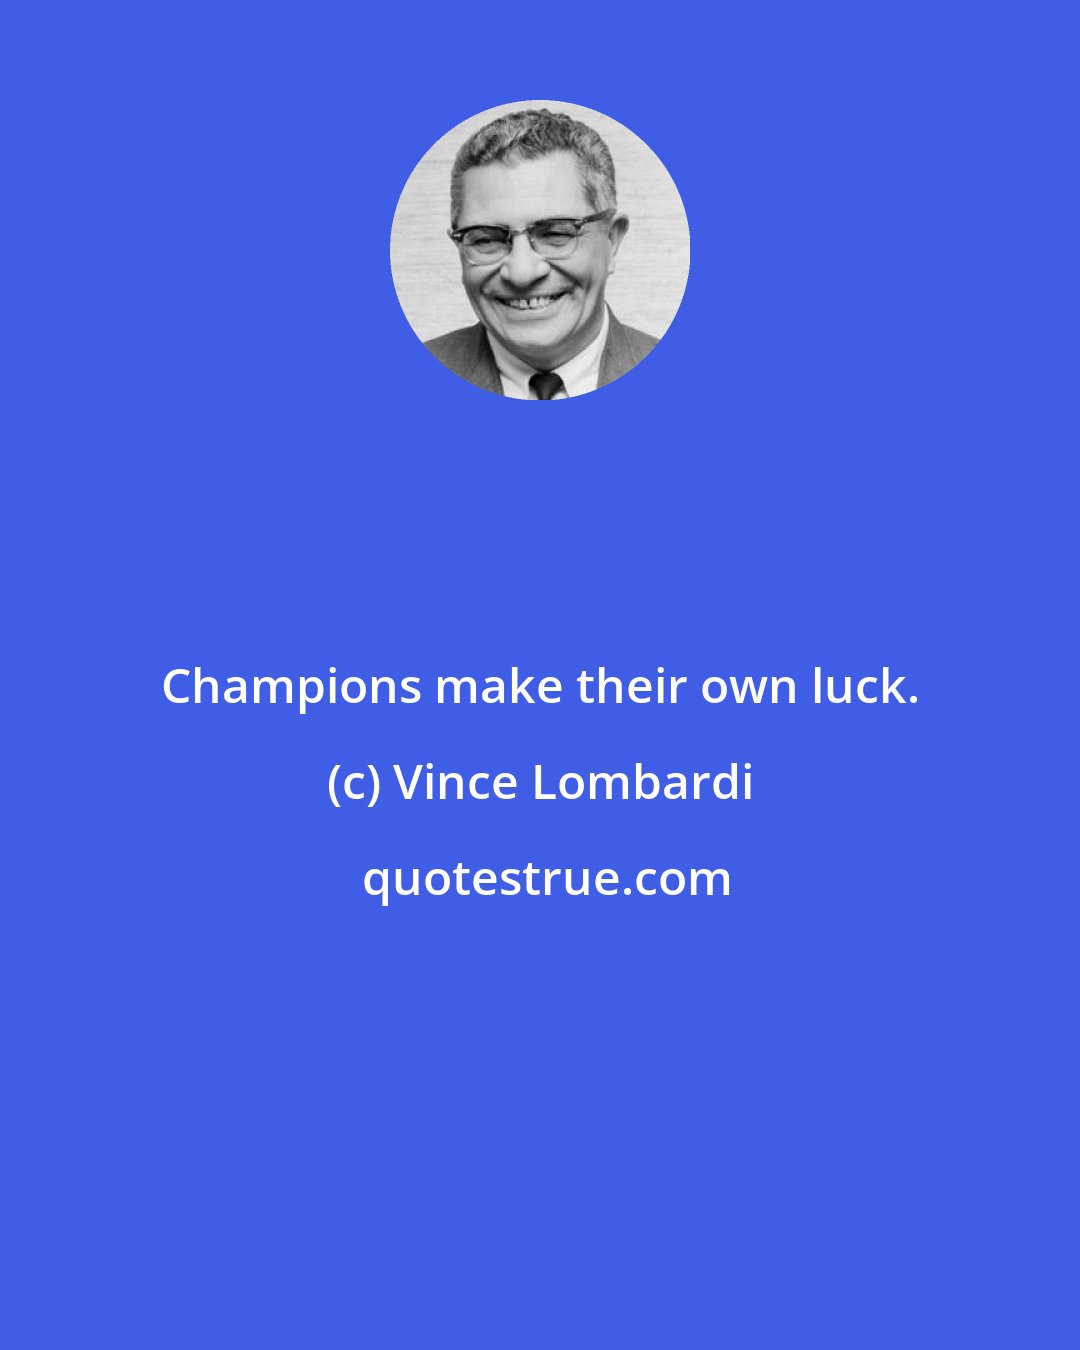 Vince Lombardi: Champions make their own luck.